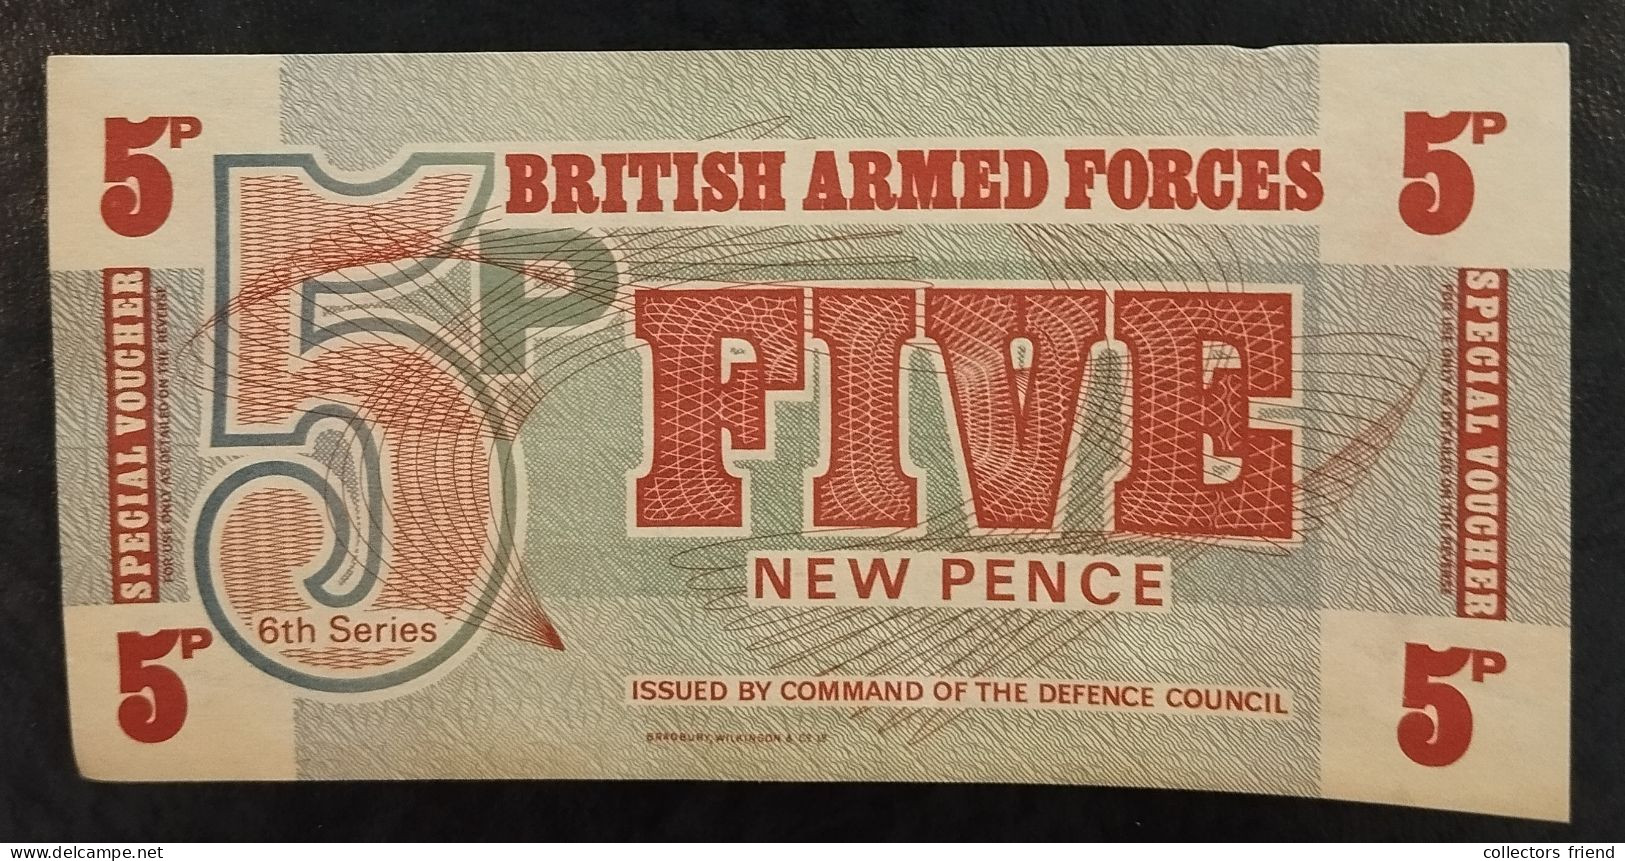 British Armed Forces - 5 + 10 New Pence - 6th Series - UNC - British Armed Forces & Special Vouchers